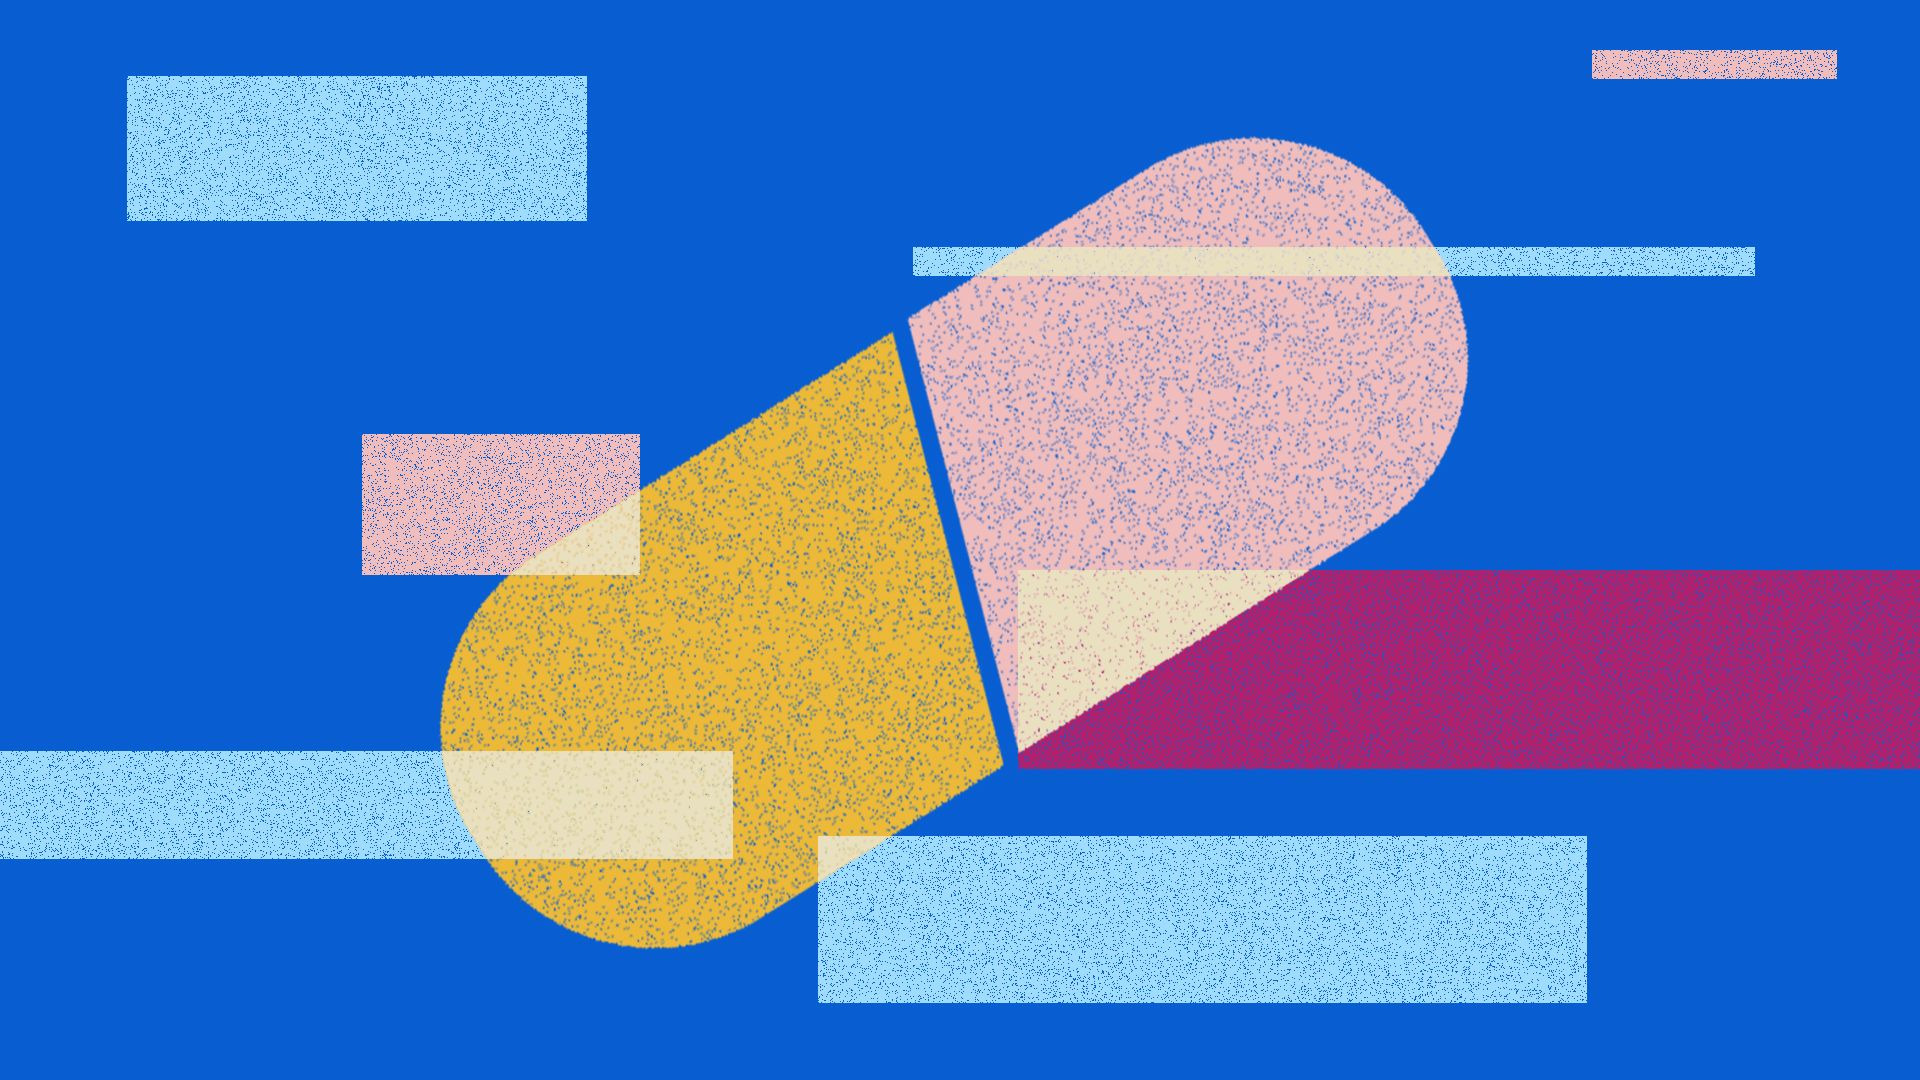 This is an illustration of a large yellow and pink pill on a blue background with abstract rectangles floating around.